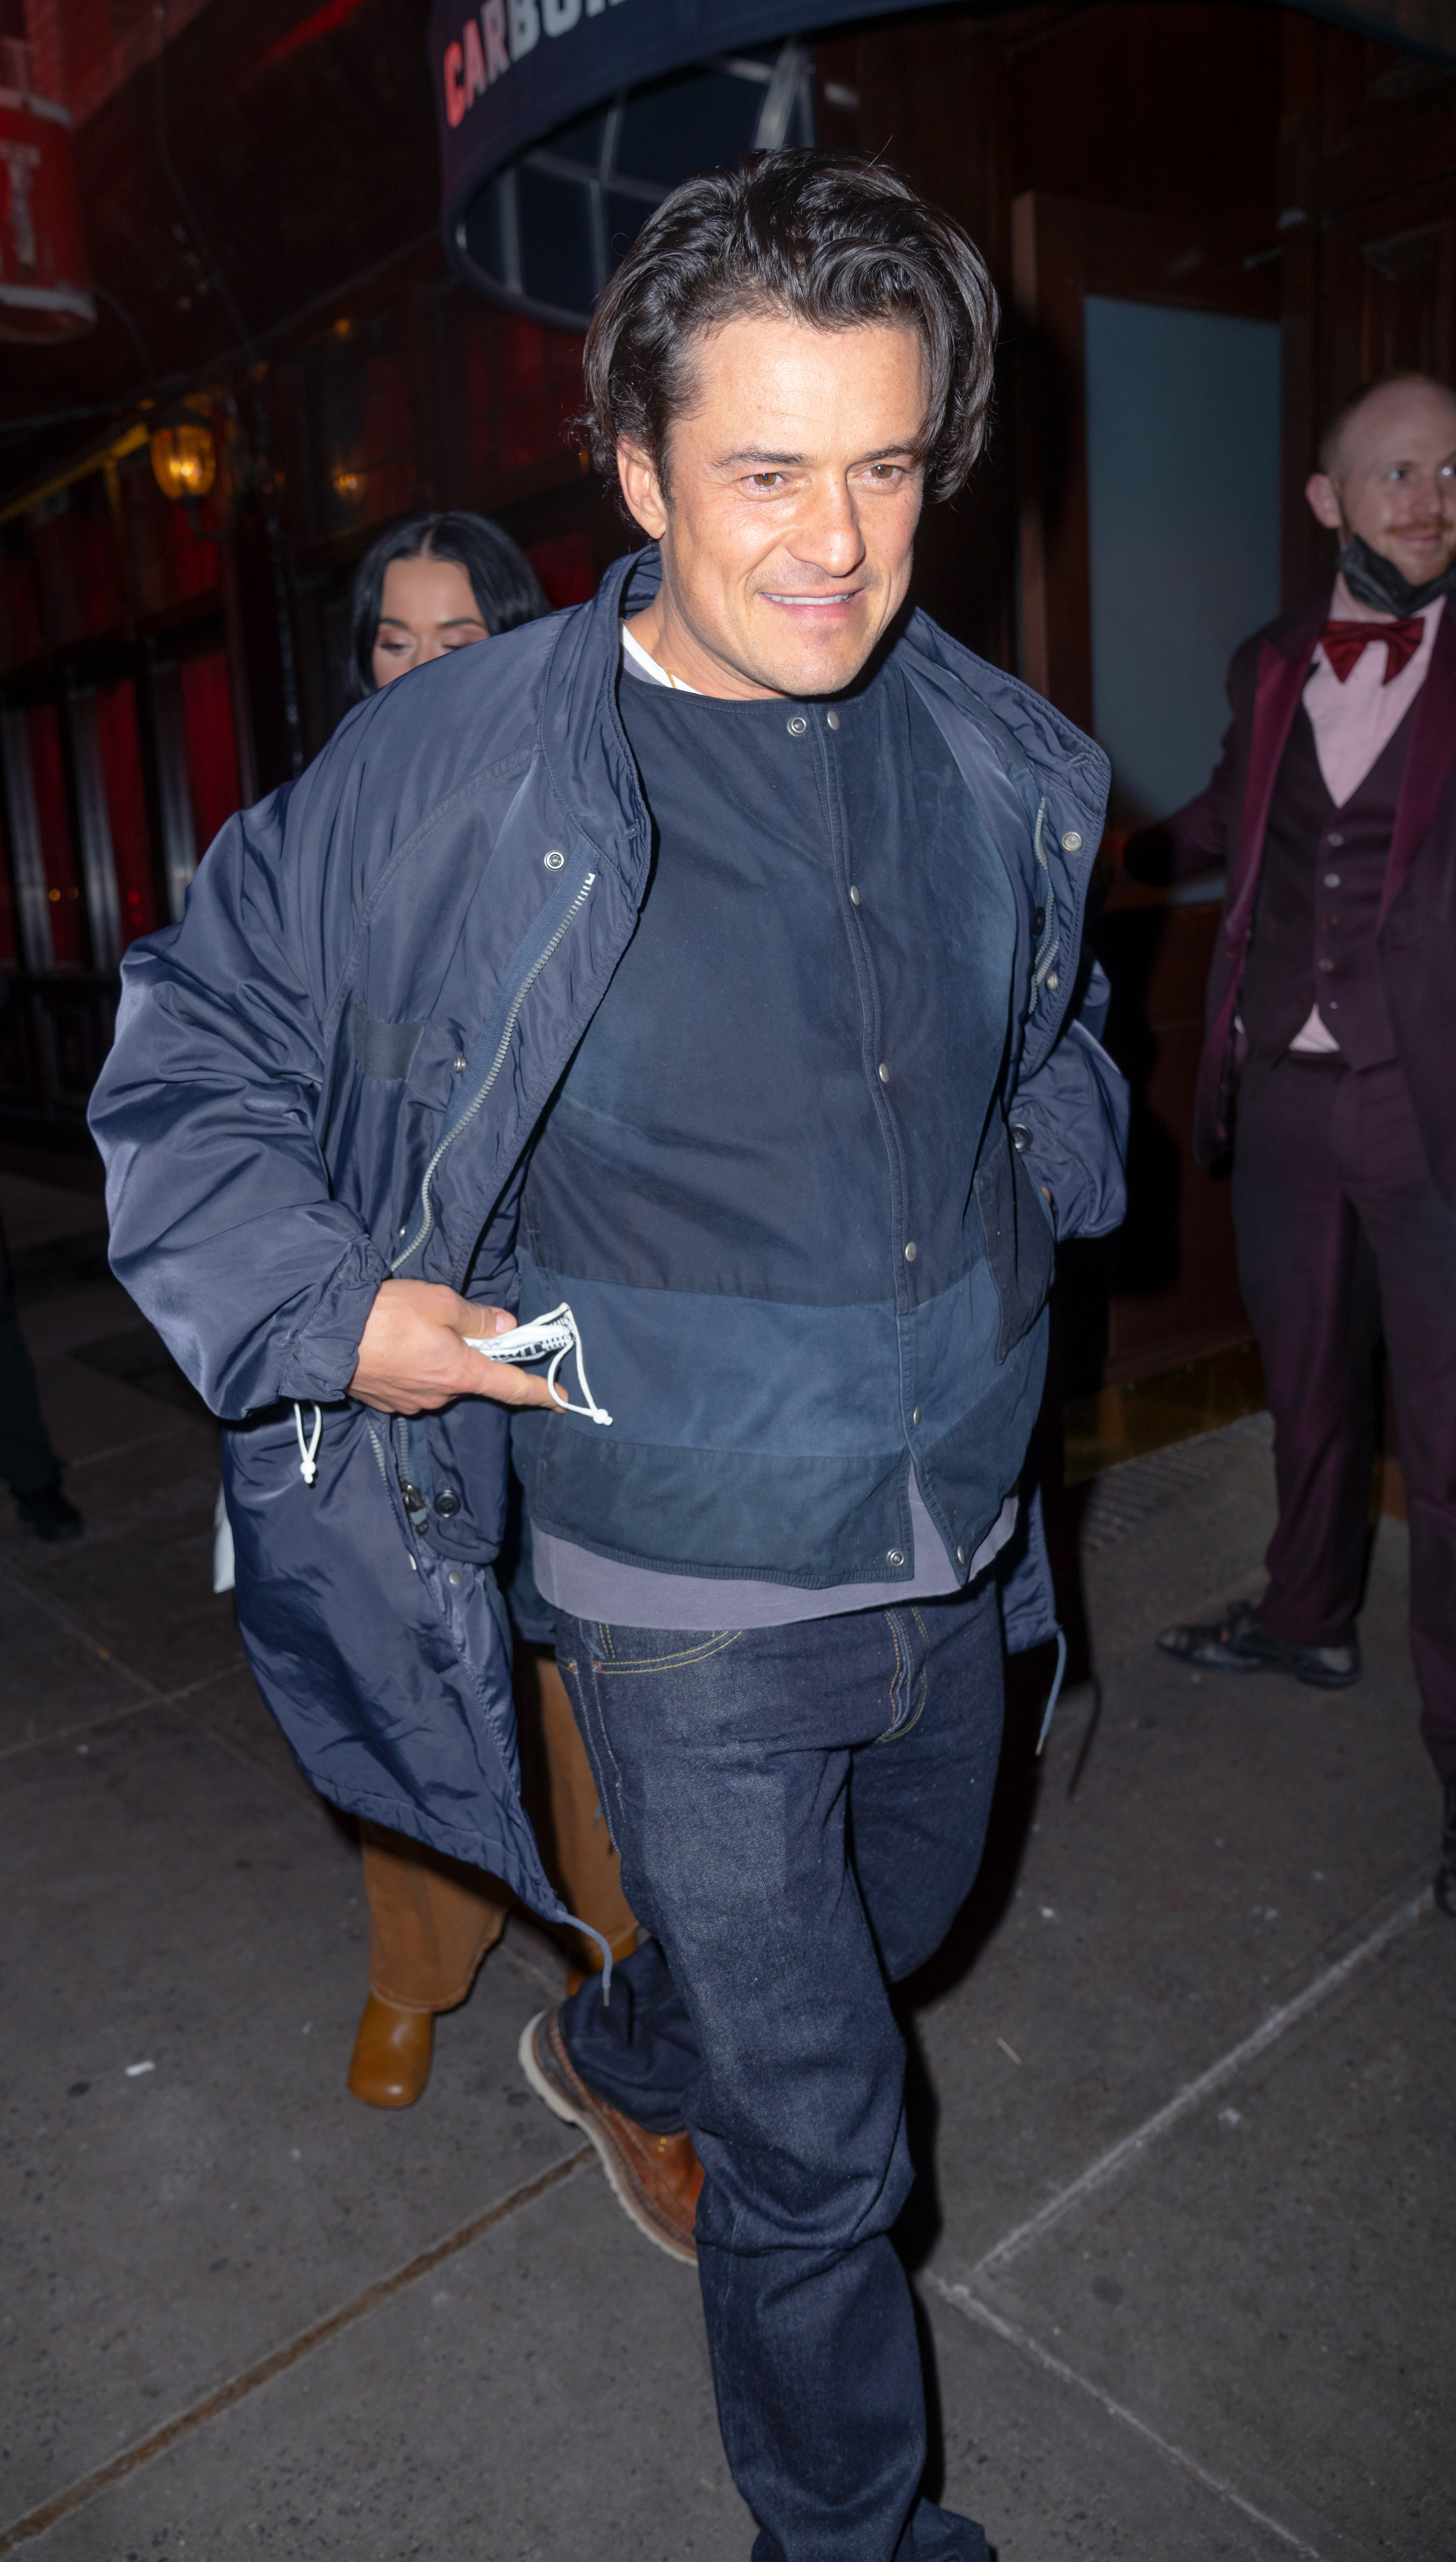 Orlando Bloom in New York City on January 28, 2022 | Source: Getty Images